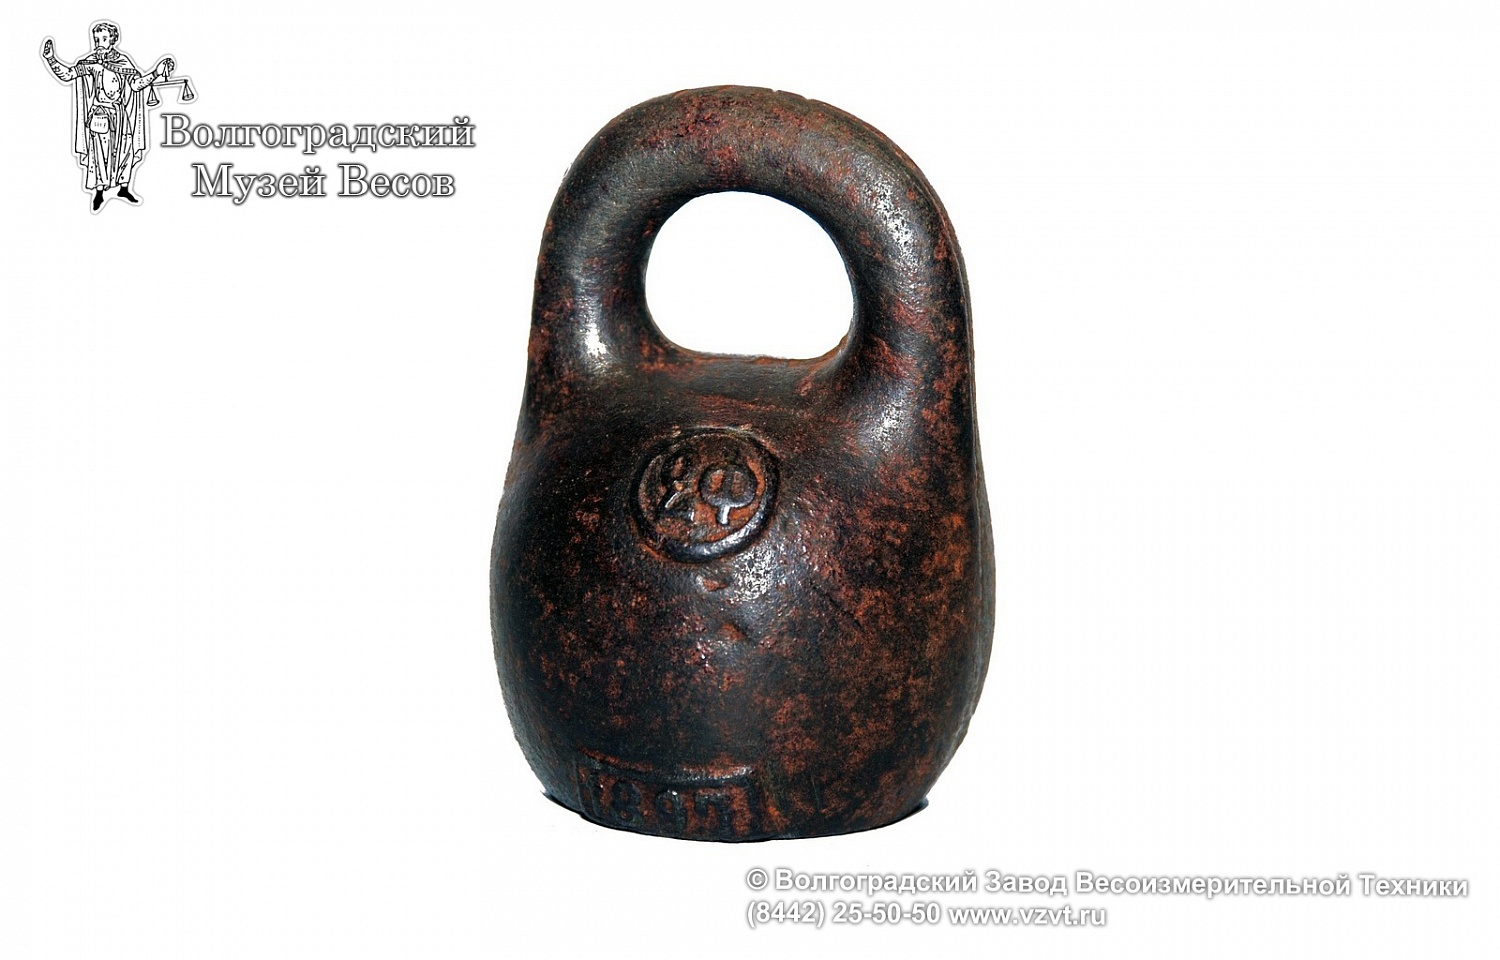 Cast iron trade weight with notches of 2 pound value. Russia, the late 19th century